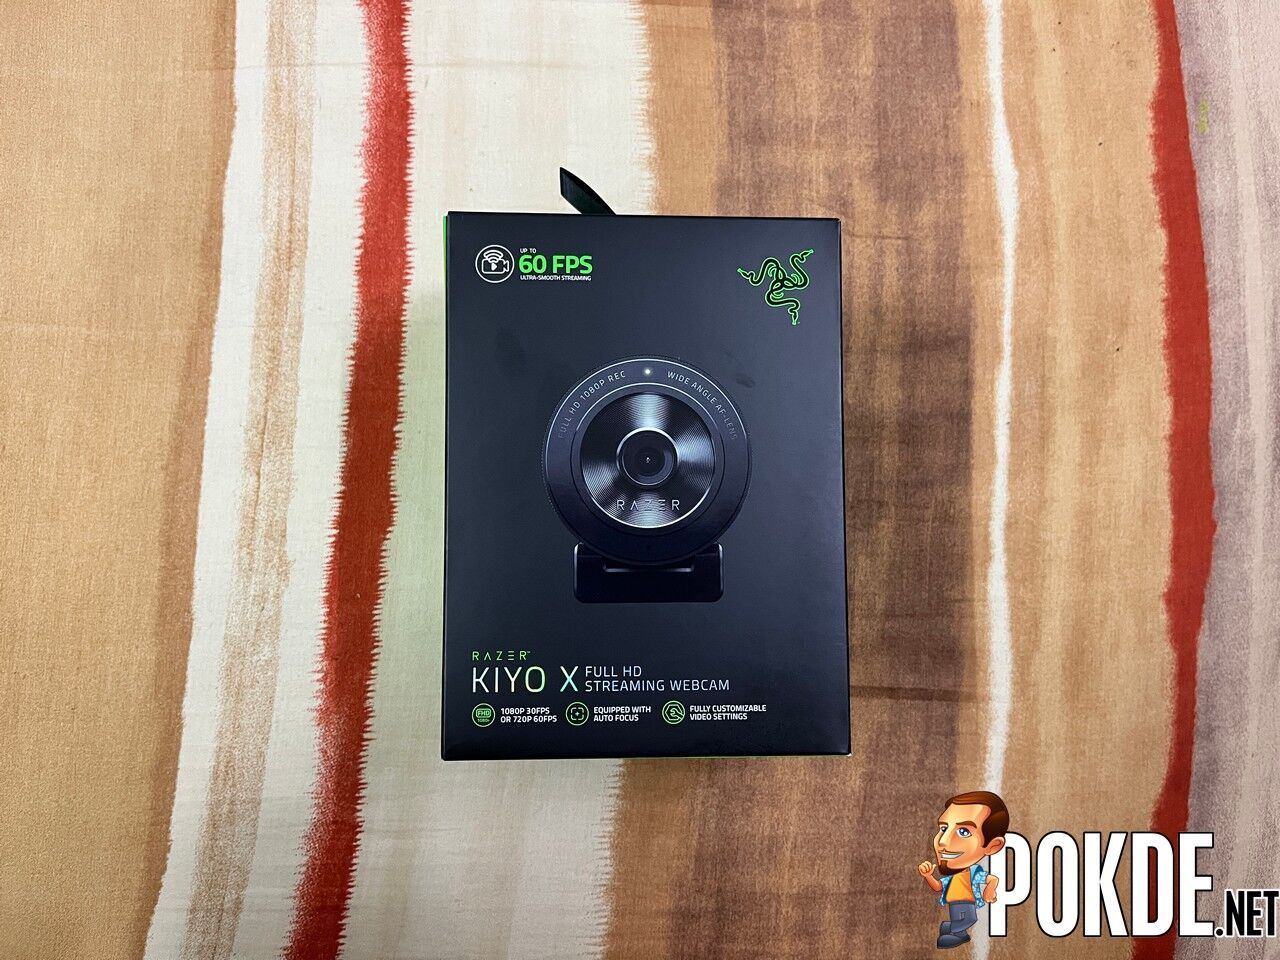 Razer Kiyo X Full HD Streaming Webcam Unboxing and Review  Undecided which  streaming webcam to get? Check out my unboxing and review of the Razer Kiyo  X Full HD Streaming Webcam! #